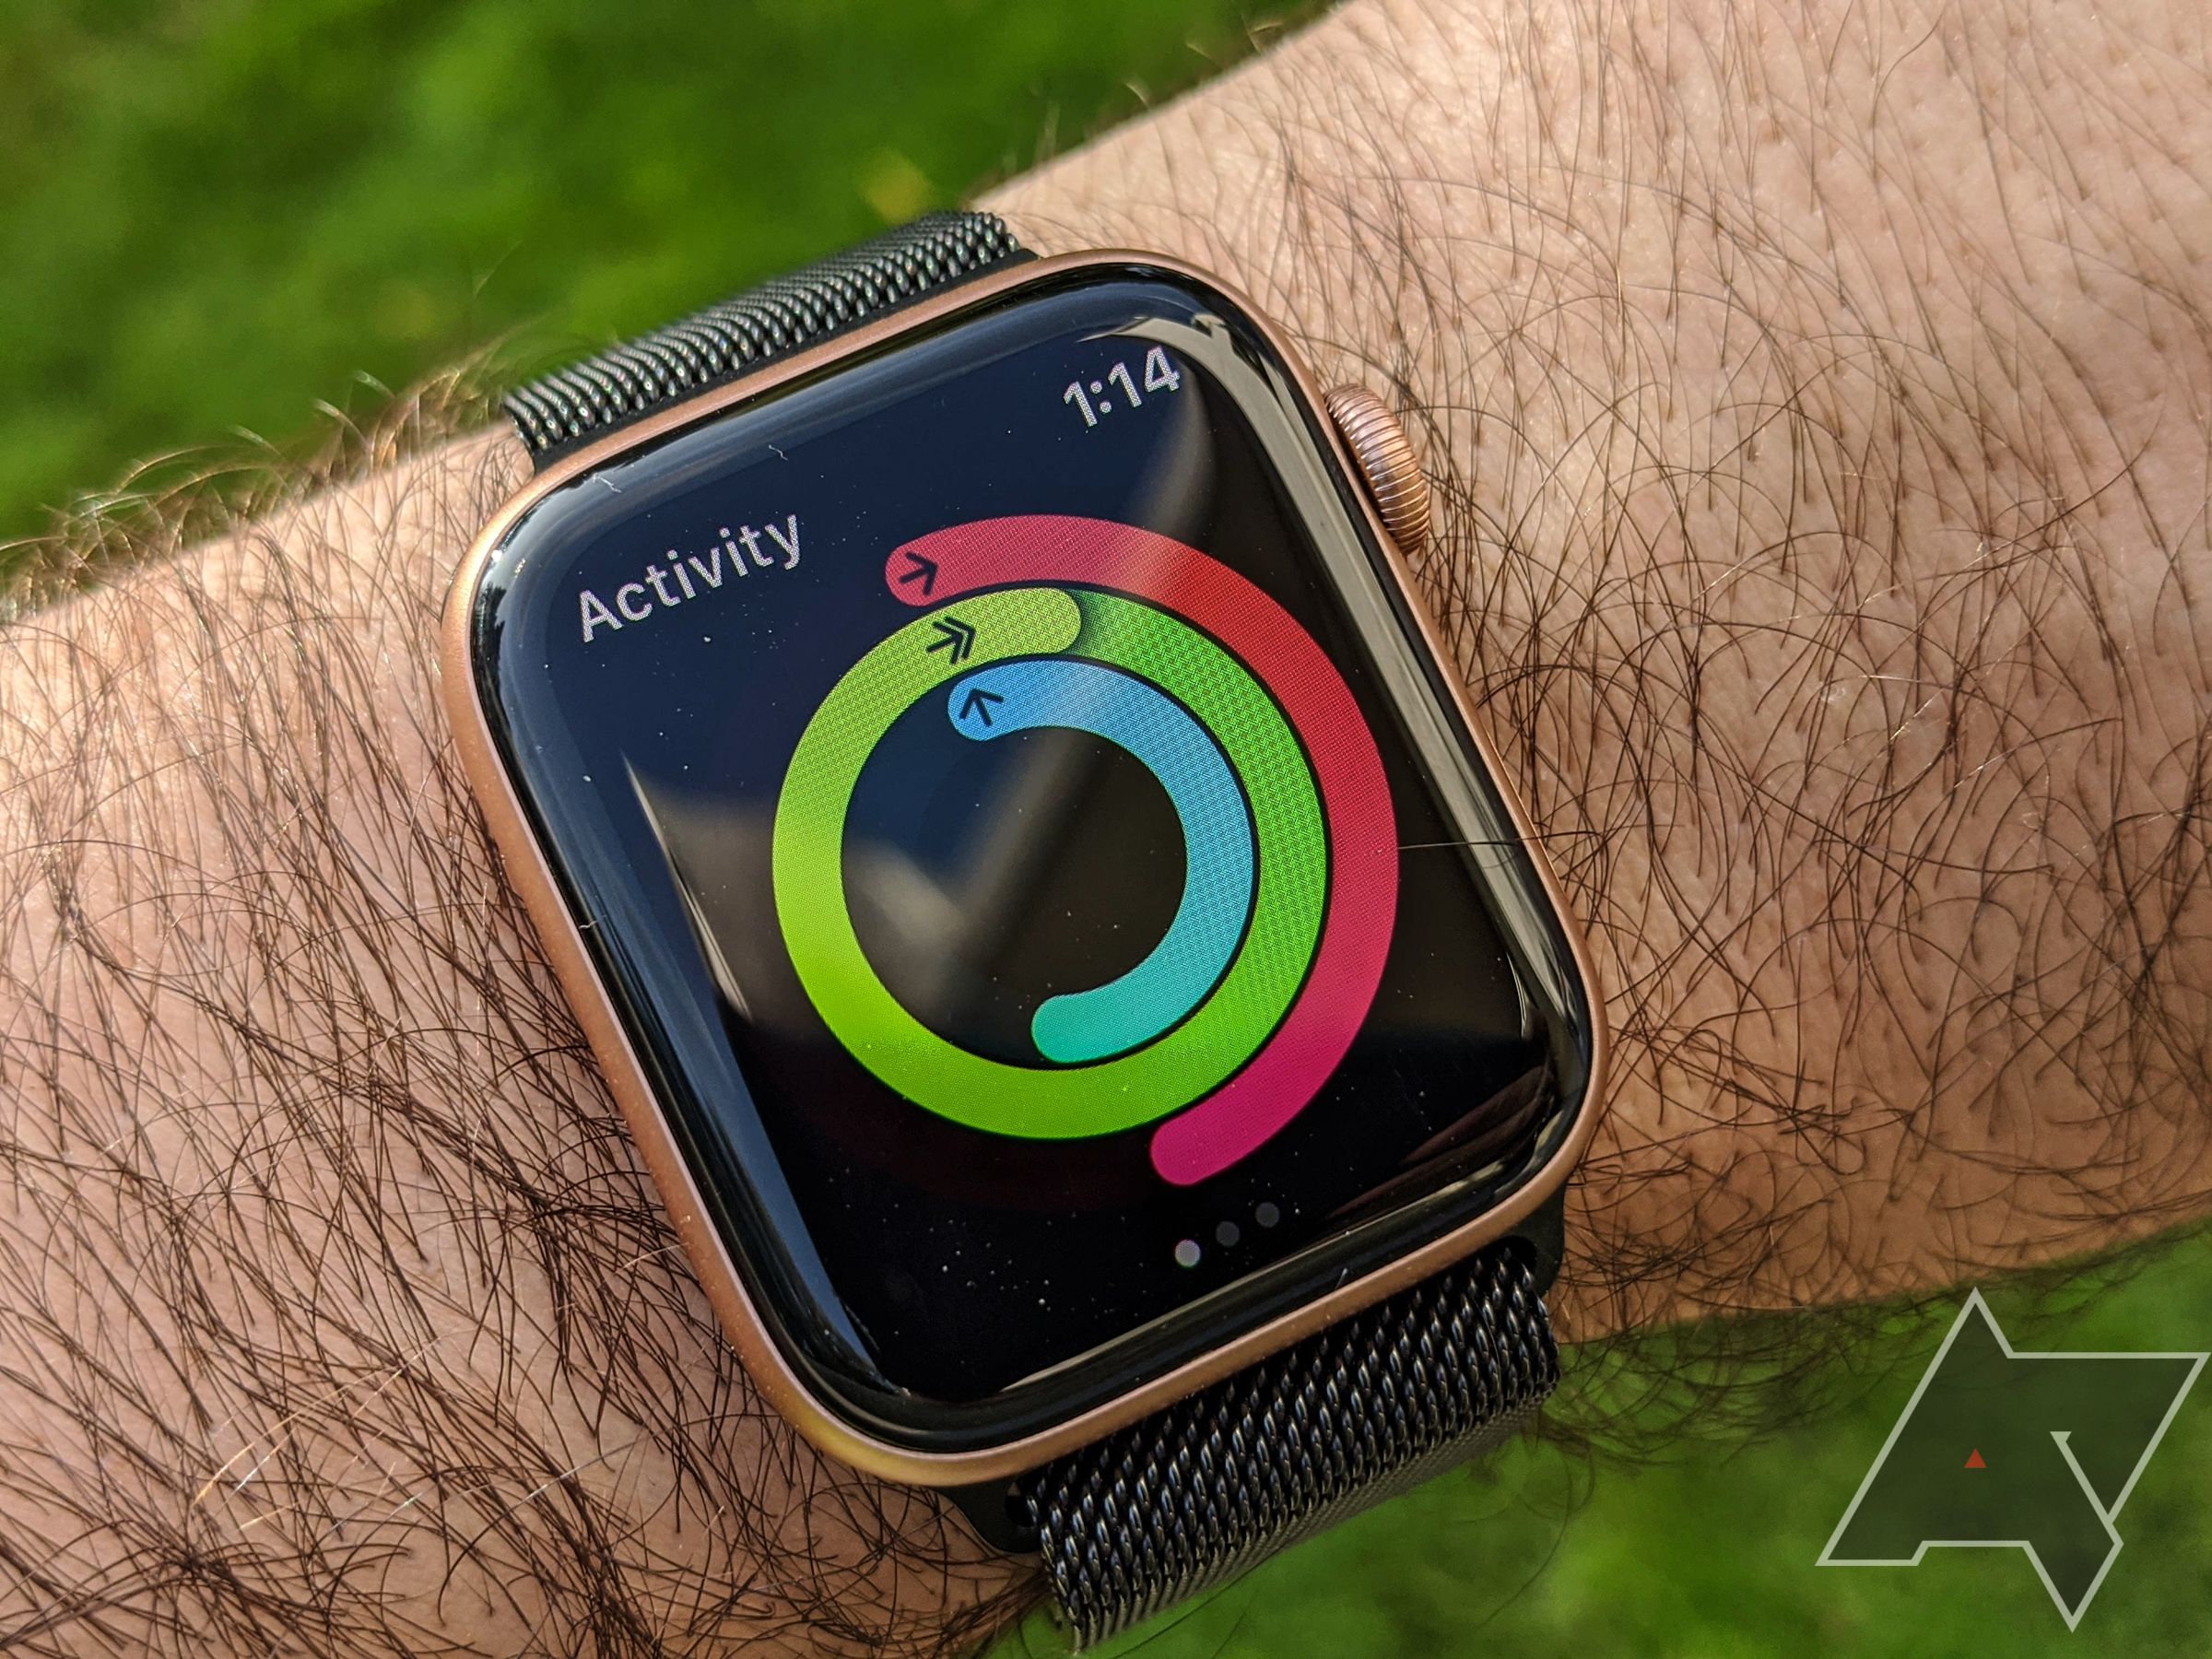 How to change fitness goals on an Apple Watch